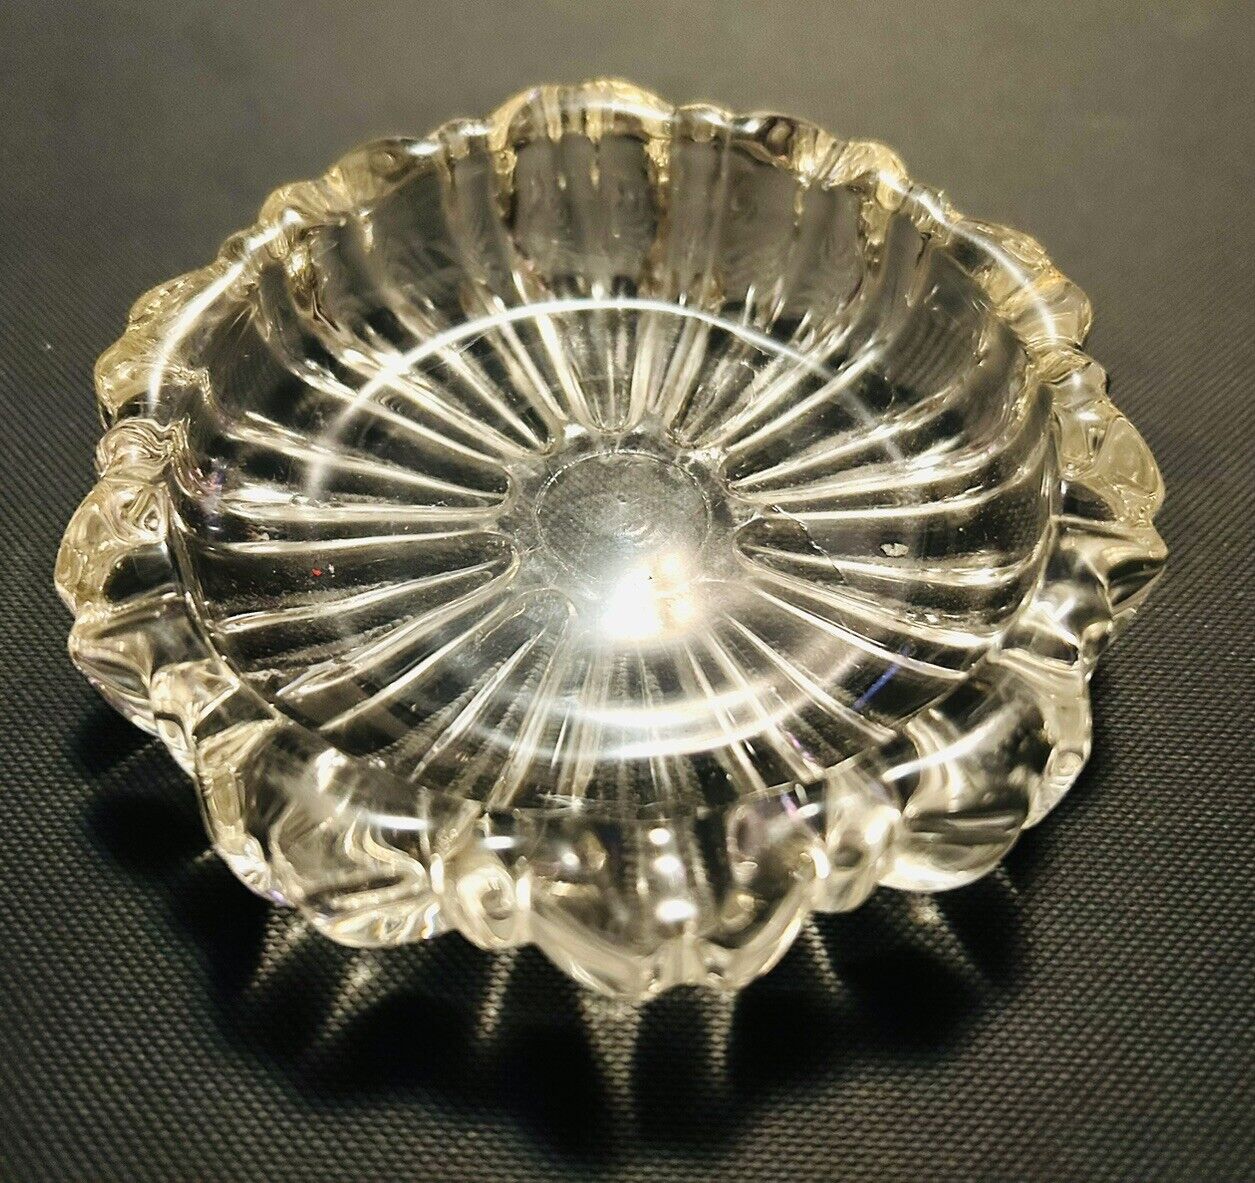 Vintage Ashtray Crystal Cut Clear Glass - Round Shape